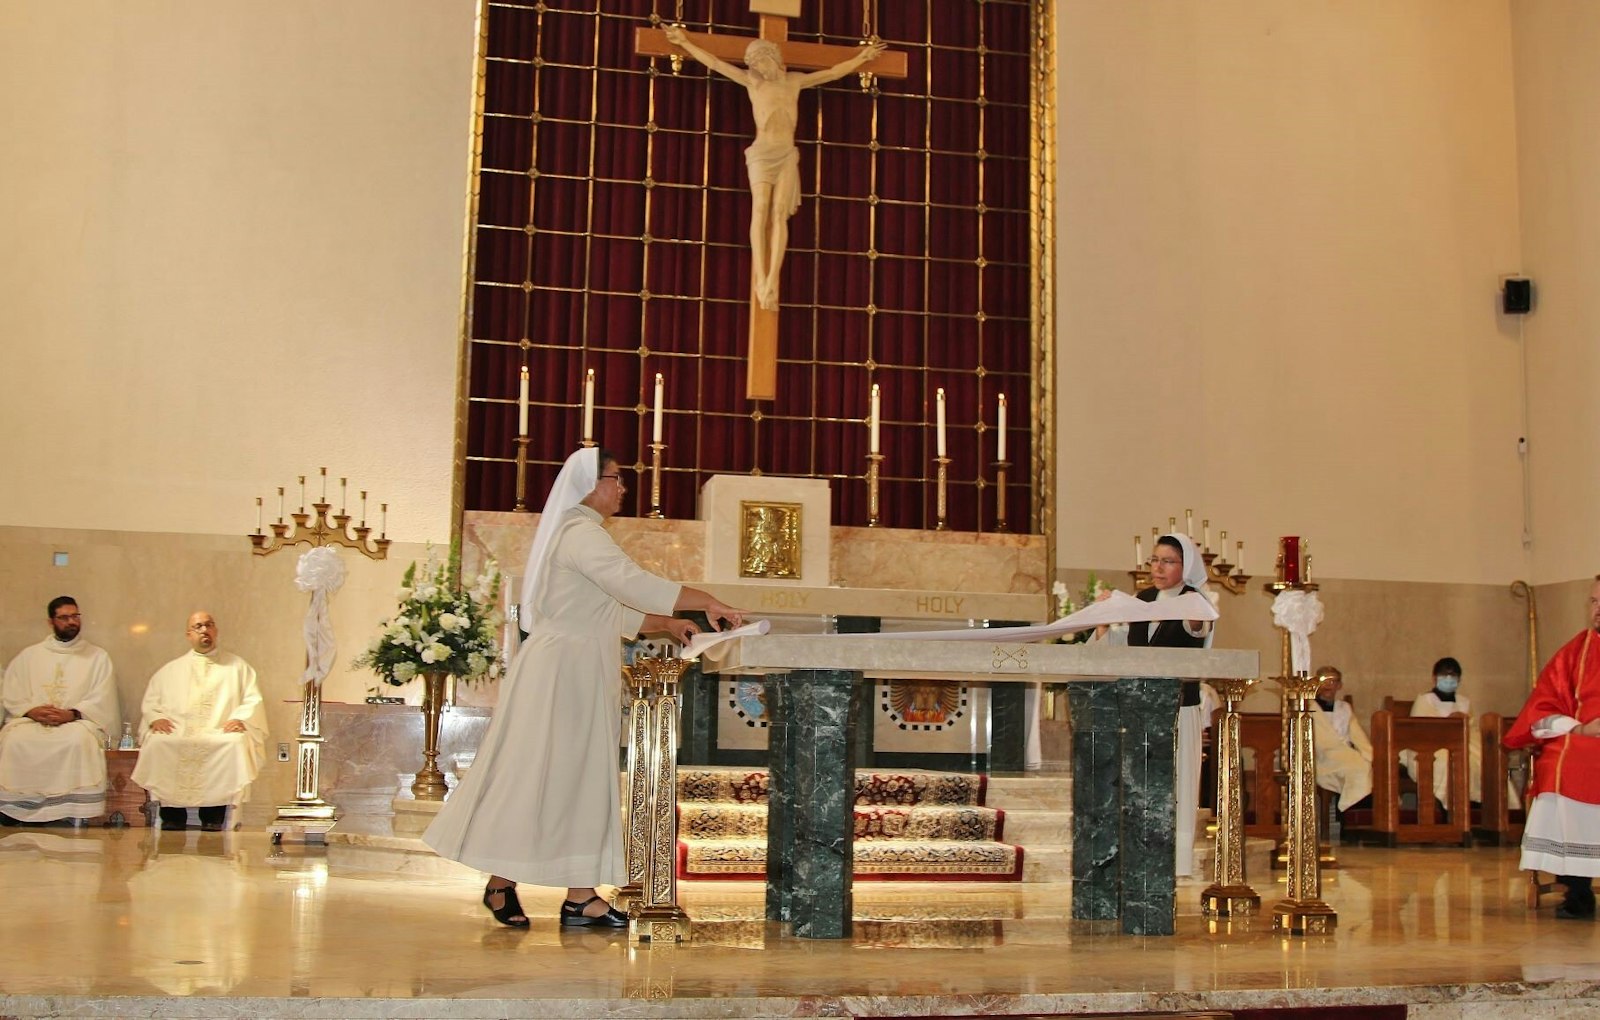 Carmelite Sisters of St. Joseph dress the altar after it is consecrated during Mass on Aug. 28. The new altar ties the traditions of the past and the old Tridentine high altar with the reforms of the Second Vatican Council and vision of the church moving forward, Northeast Macomb Family of Parishes moderator Fr. John Maksym said.